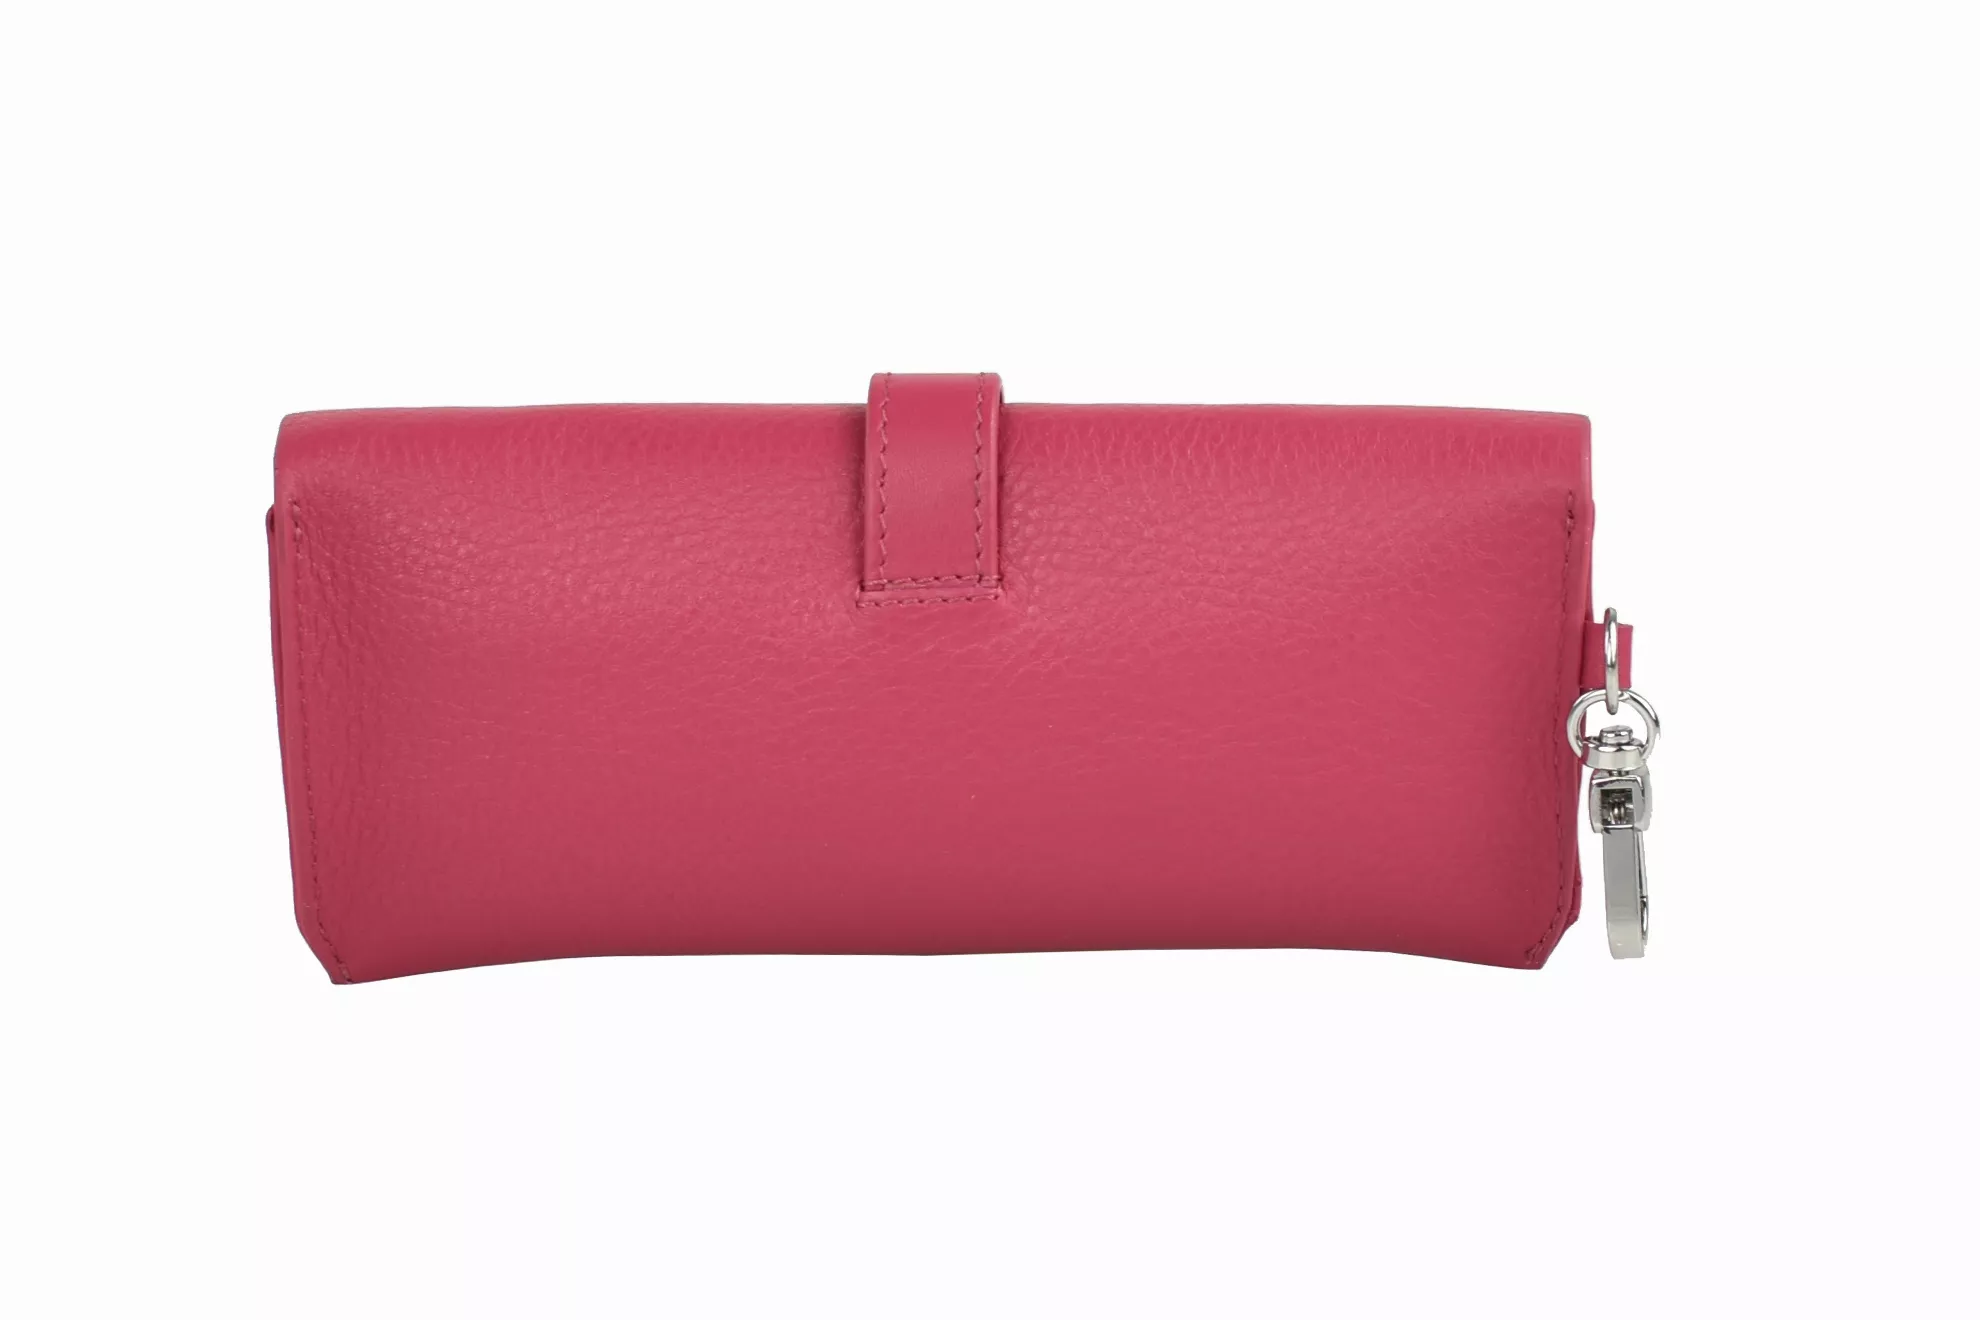 ROMY Suncover / Glases Case, pink